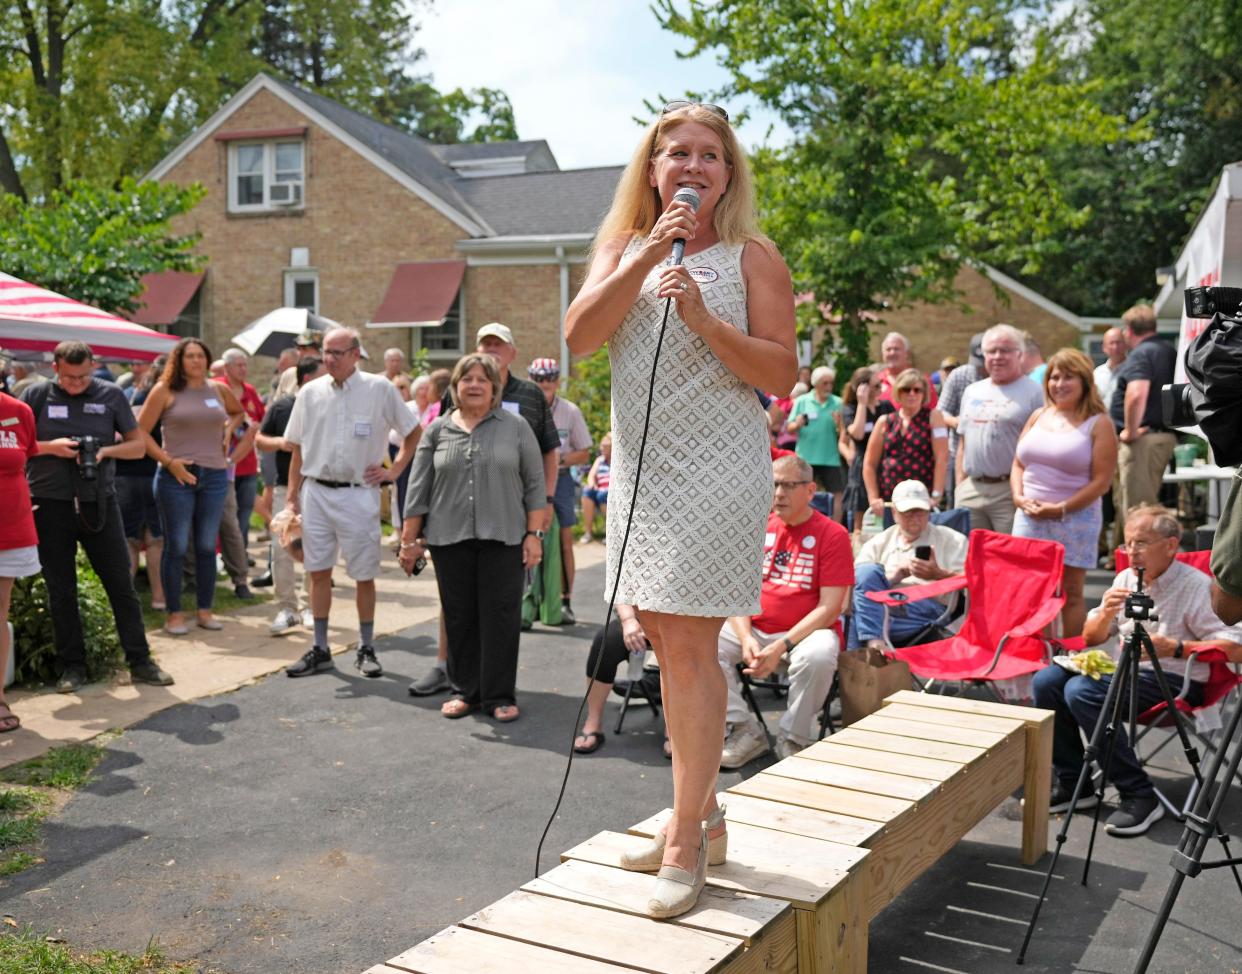 State Rep. Amy Loudenbeck, running for Wisconsin secretary of state, speaks during the 53rd Chicken Burn on West Potter Road in Wauwatosa on Aug. 28.